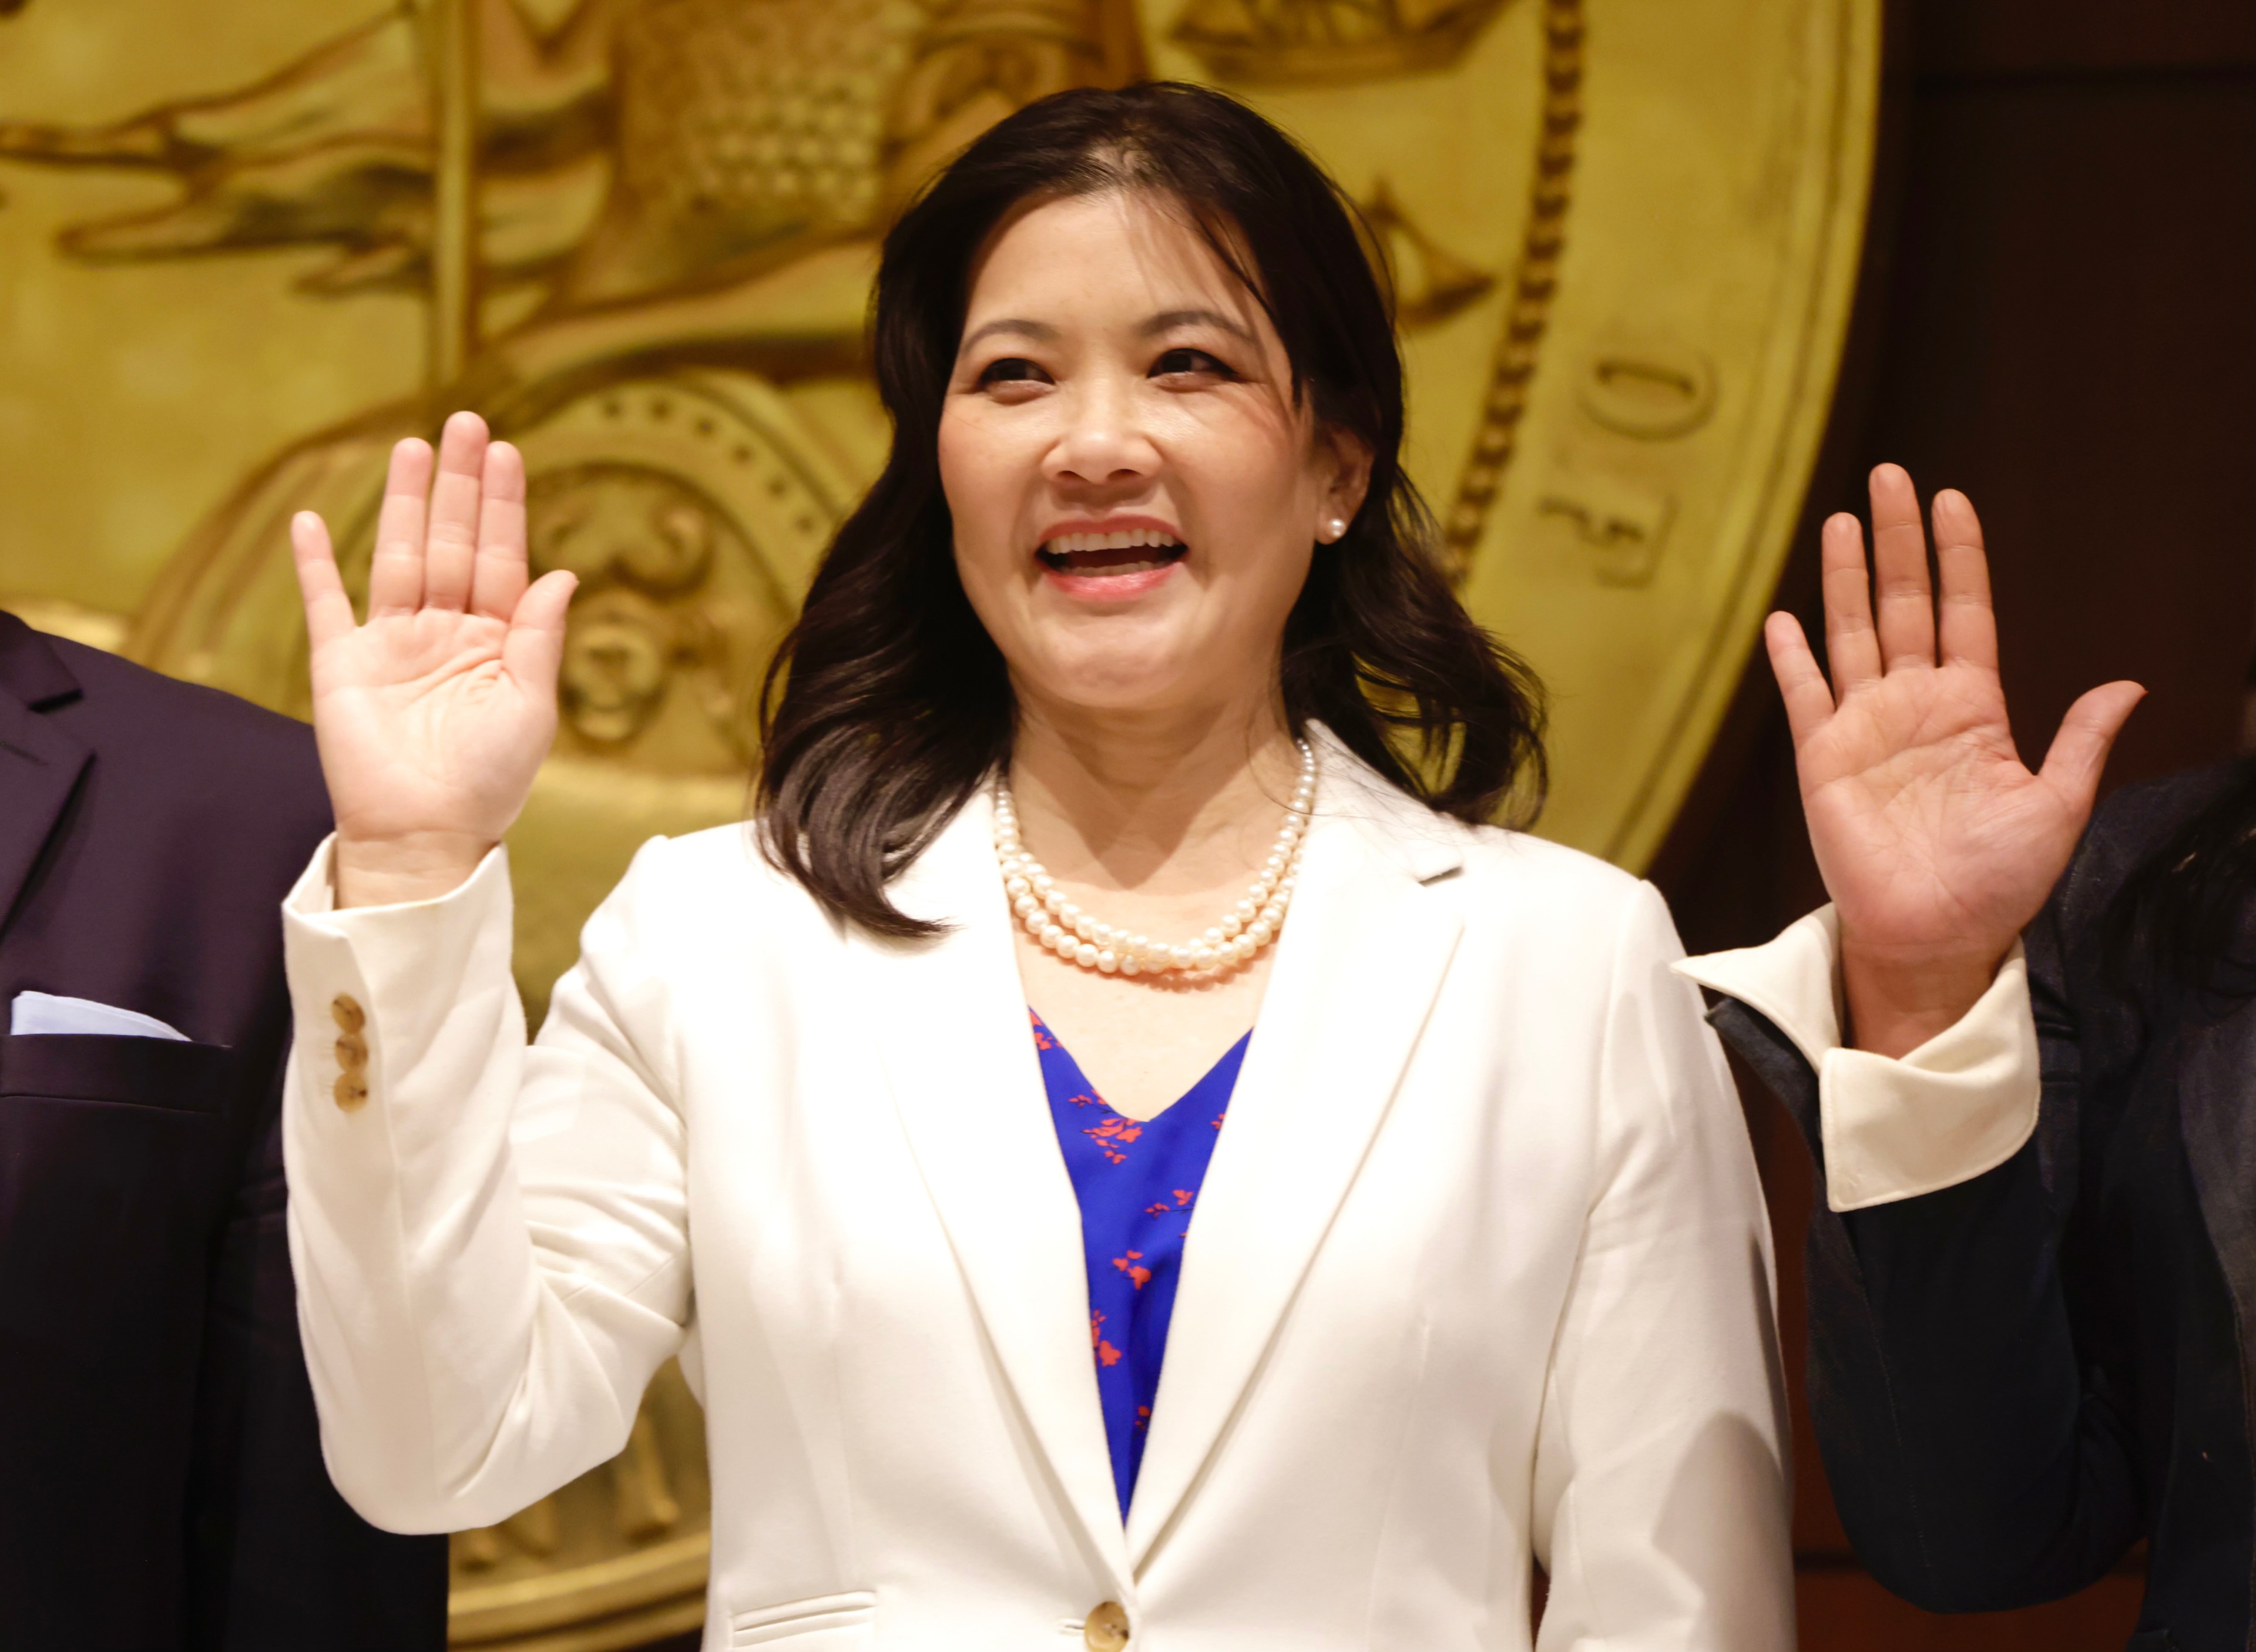 A woman in a white jacket is smiling and raising her hands, with ornate golden decor in the background.